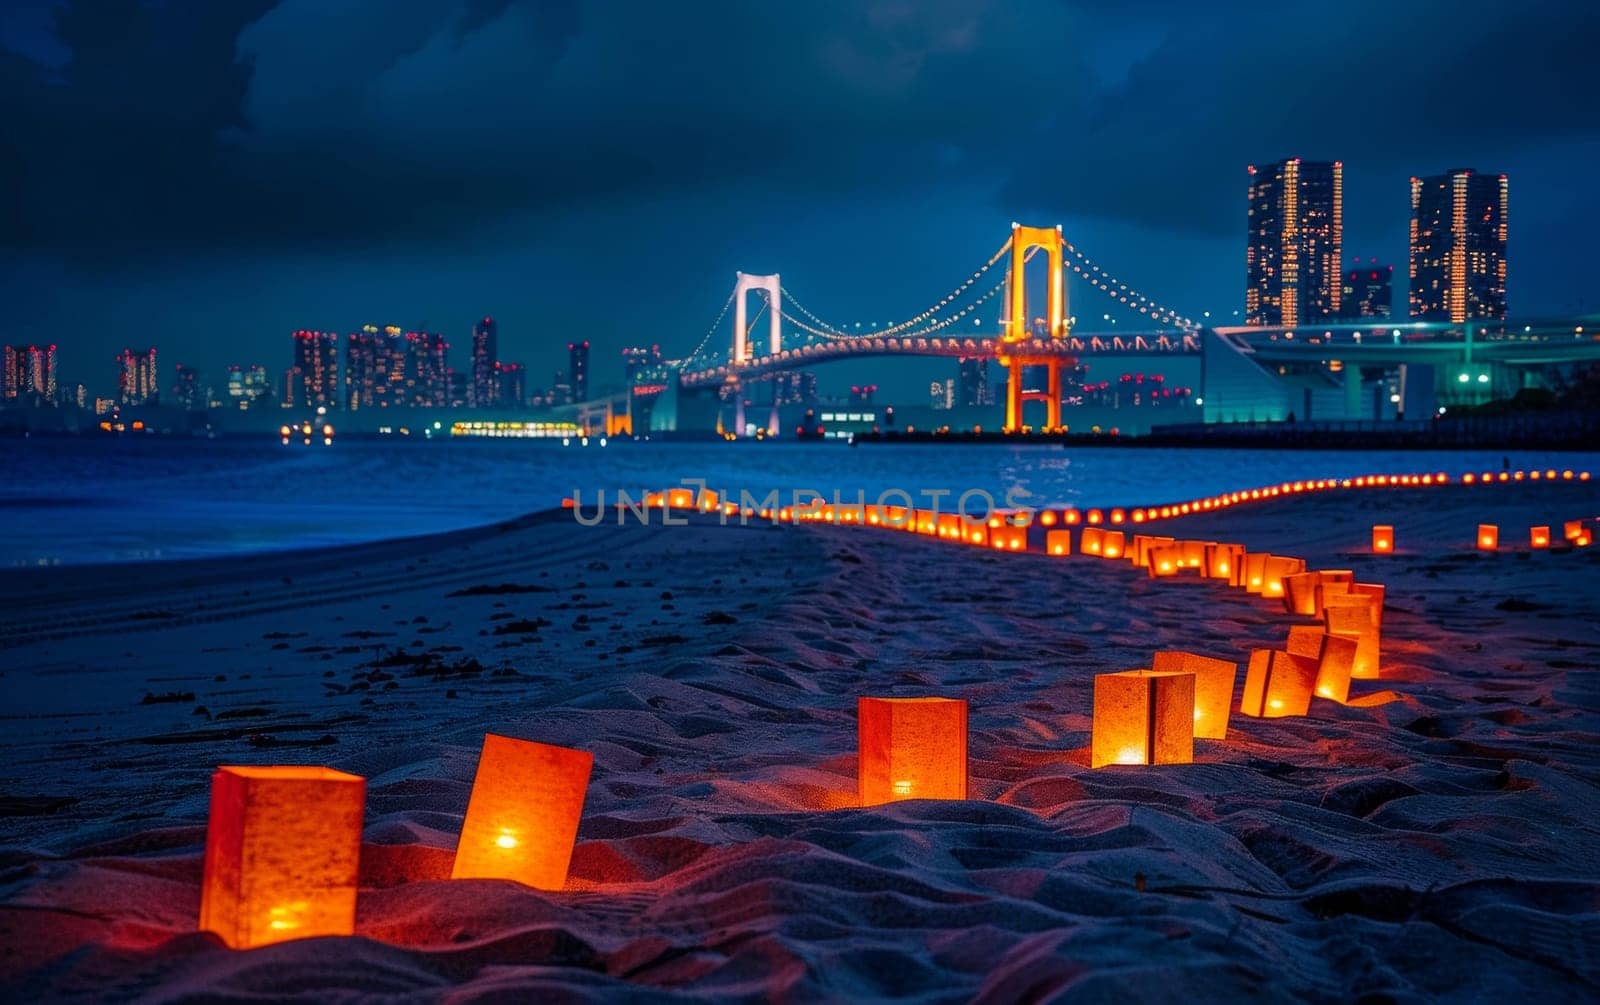 A serene beach setting at dusk, illuminated by a string of candles leading towards a brightly lit suspension bridge and city skyline. Japanese Marine Day Umi no Hi also known as Ocean Day or Sea Day by sfinks